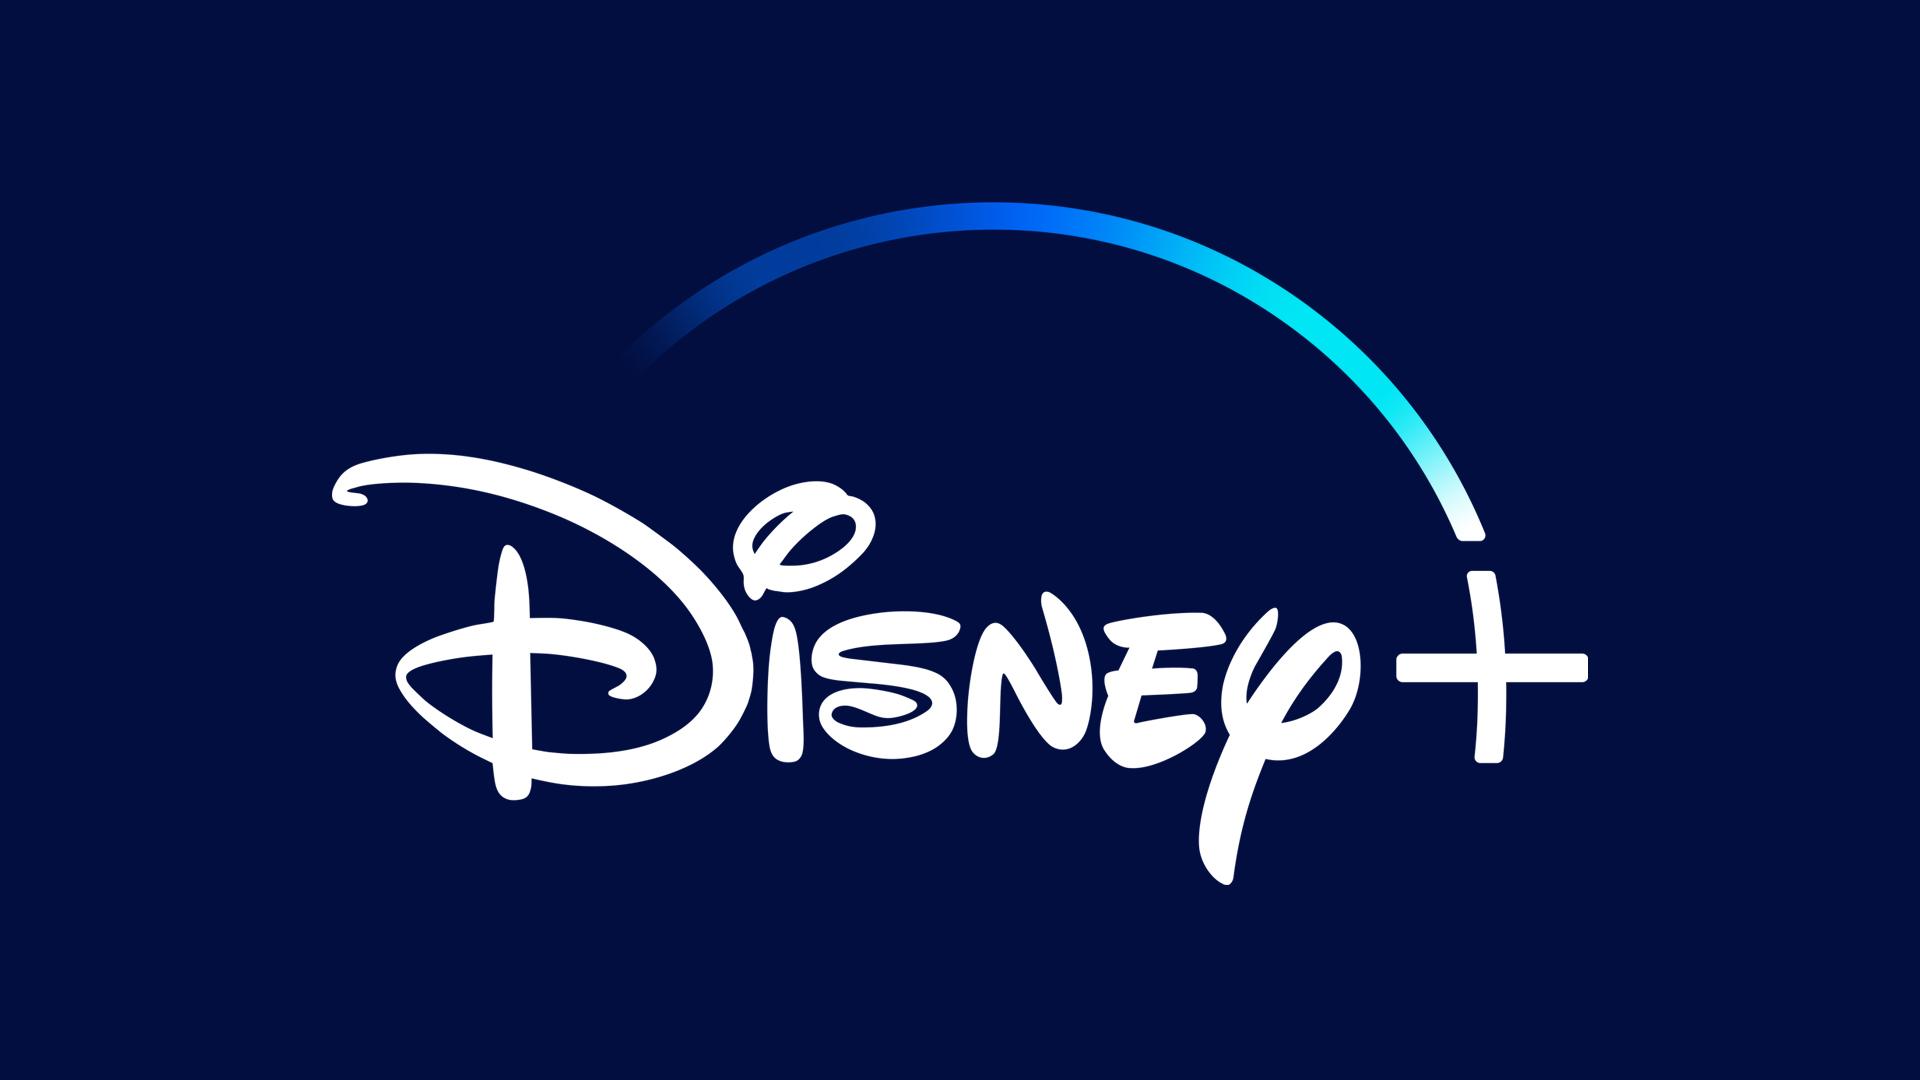 Disney+ Day to Offer Introductory Offer and Perks For Subscribers